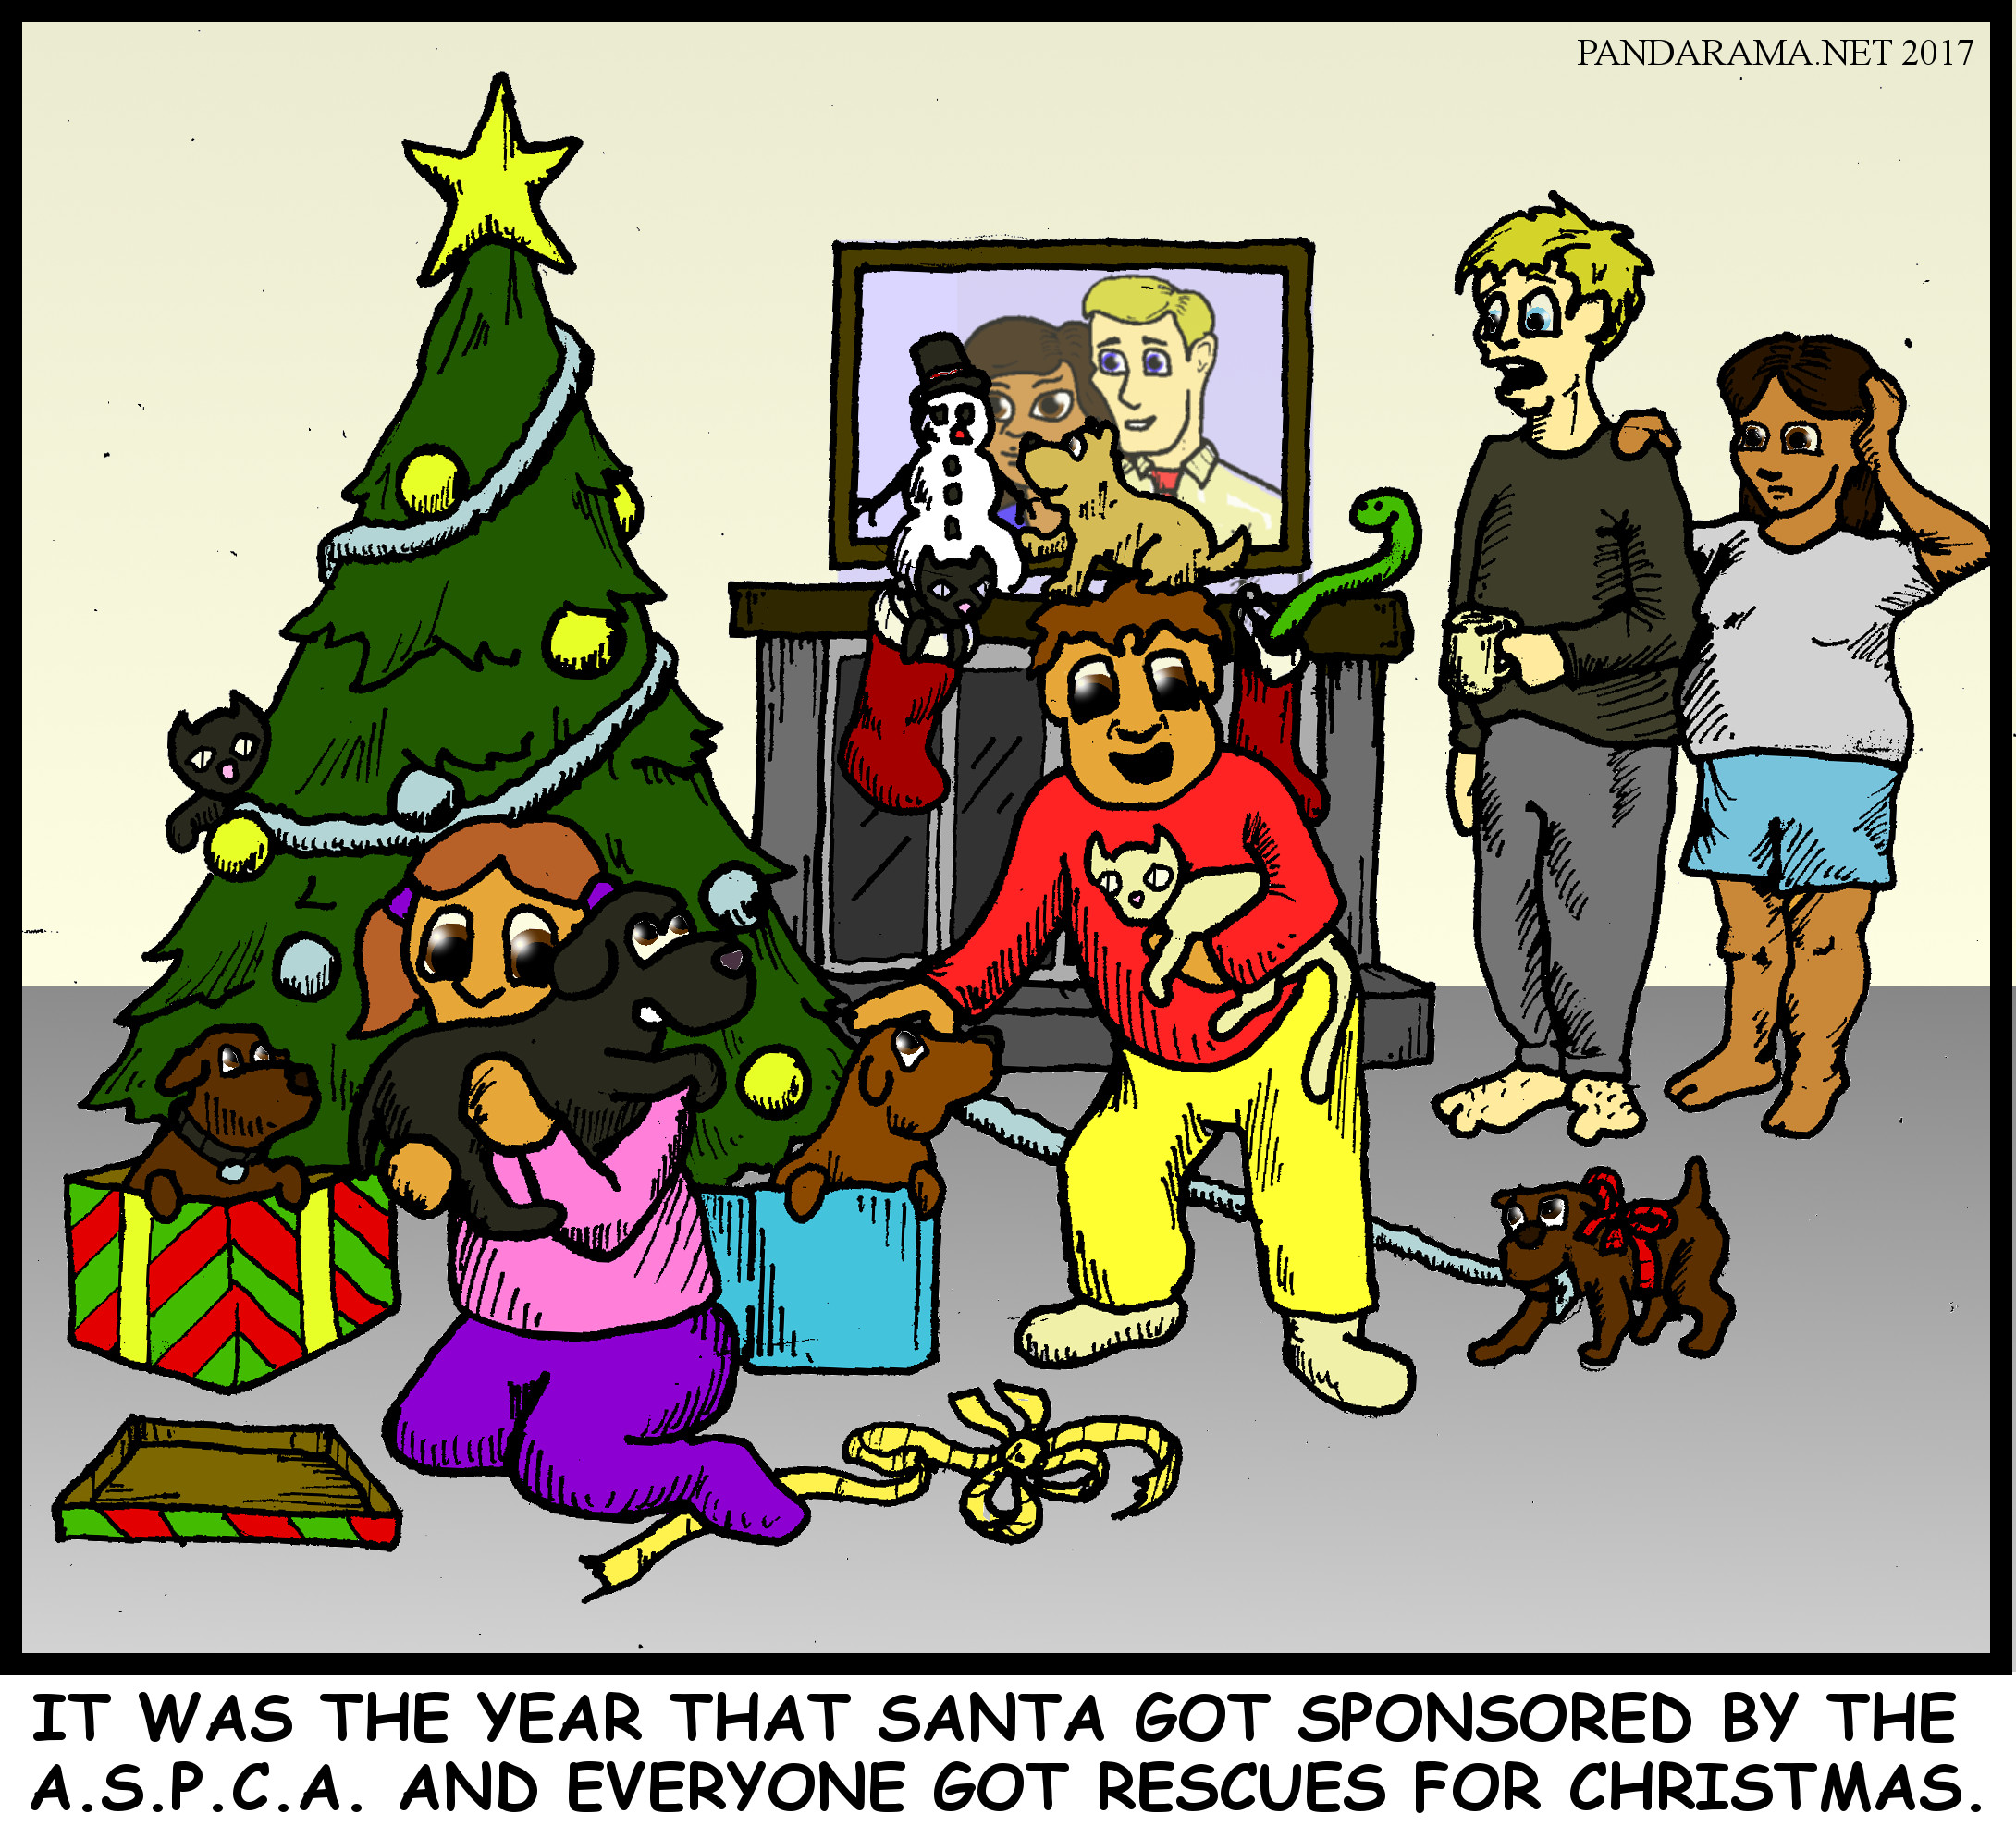 rescues cartoon. christmas puppy. spay and neuter your pets cartoon. Santa gets sponsored by ASPCA and gives nothign but rescued animals for christmas.